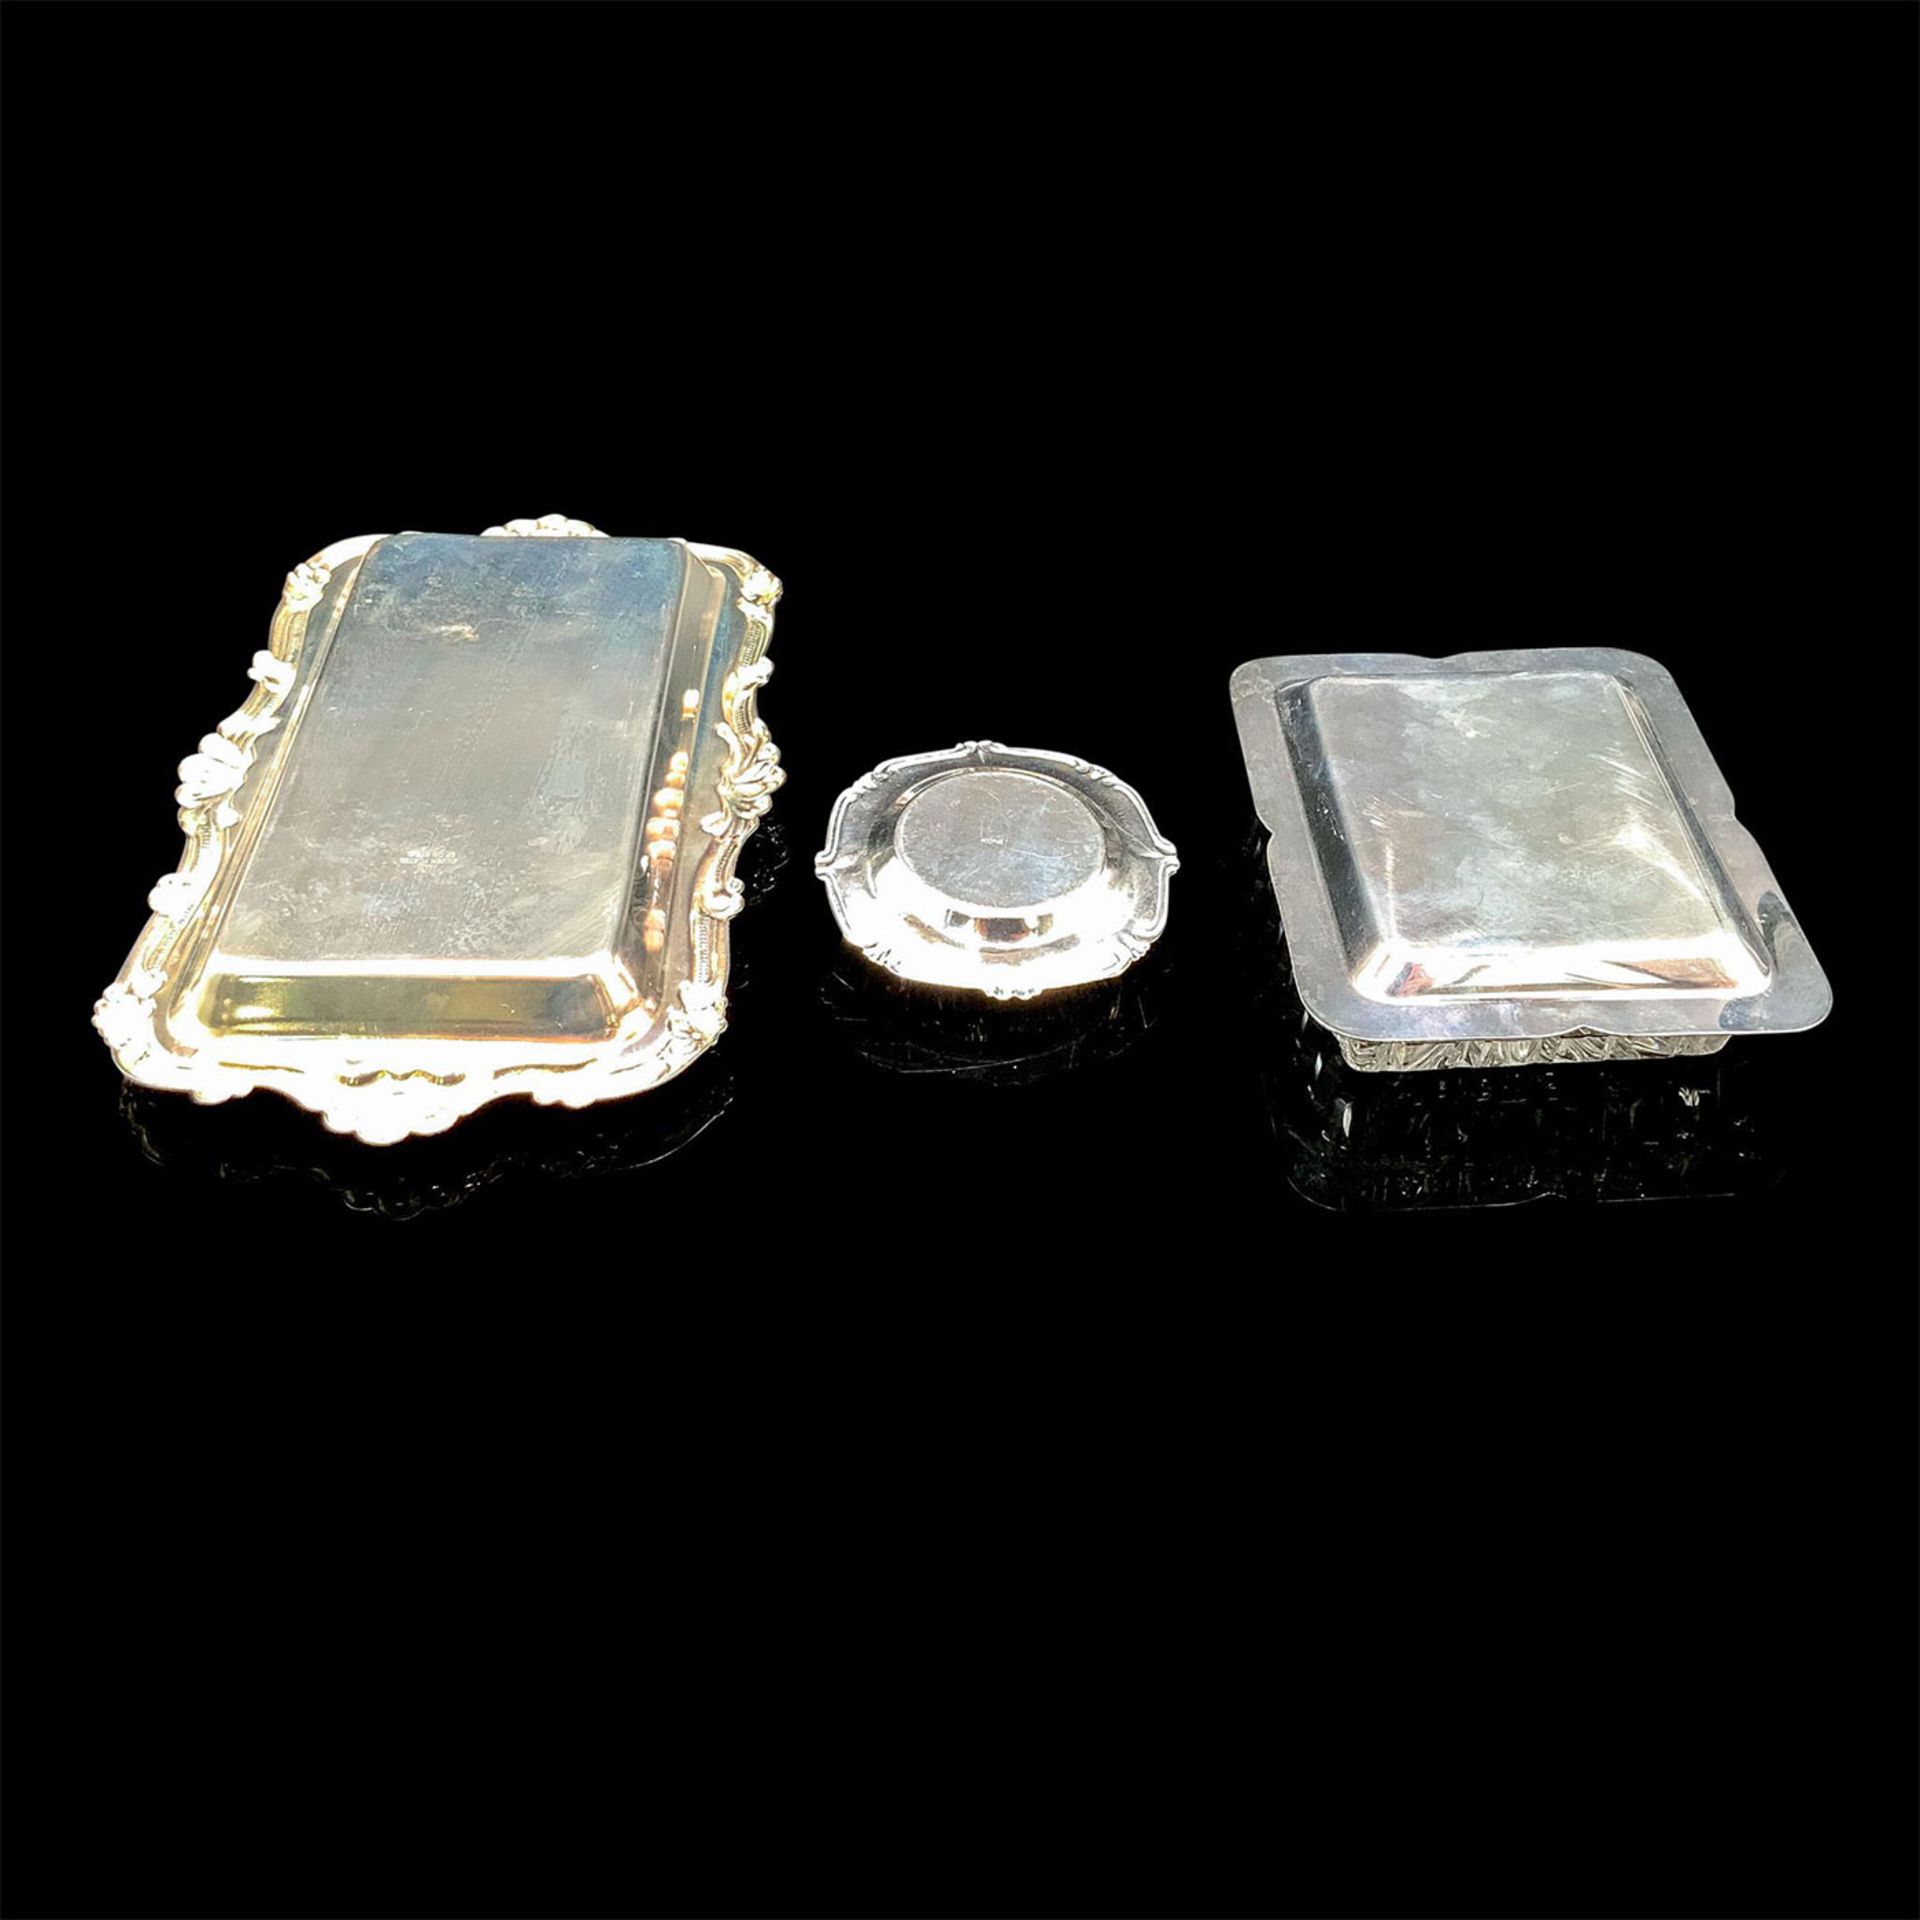 3pc Silver Coated Steel and Glass Serving Trays - Image 3 of 3